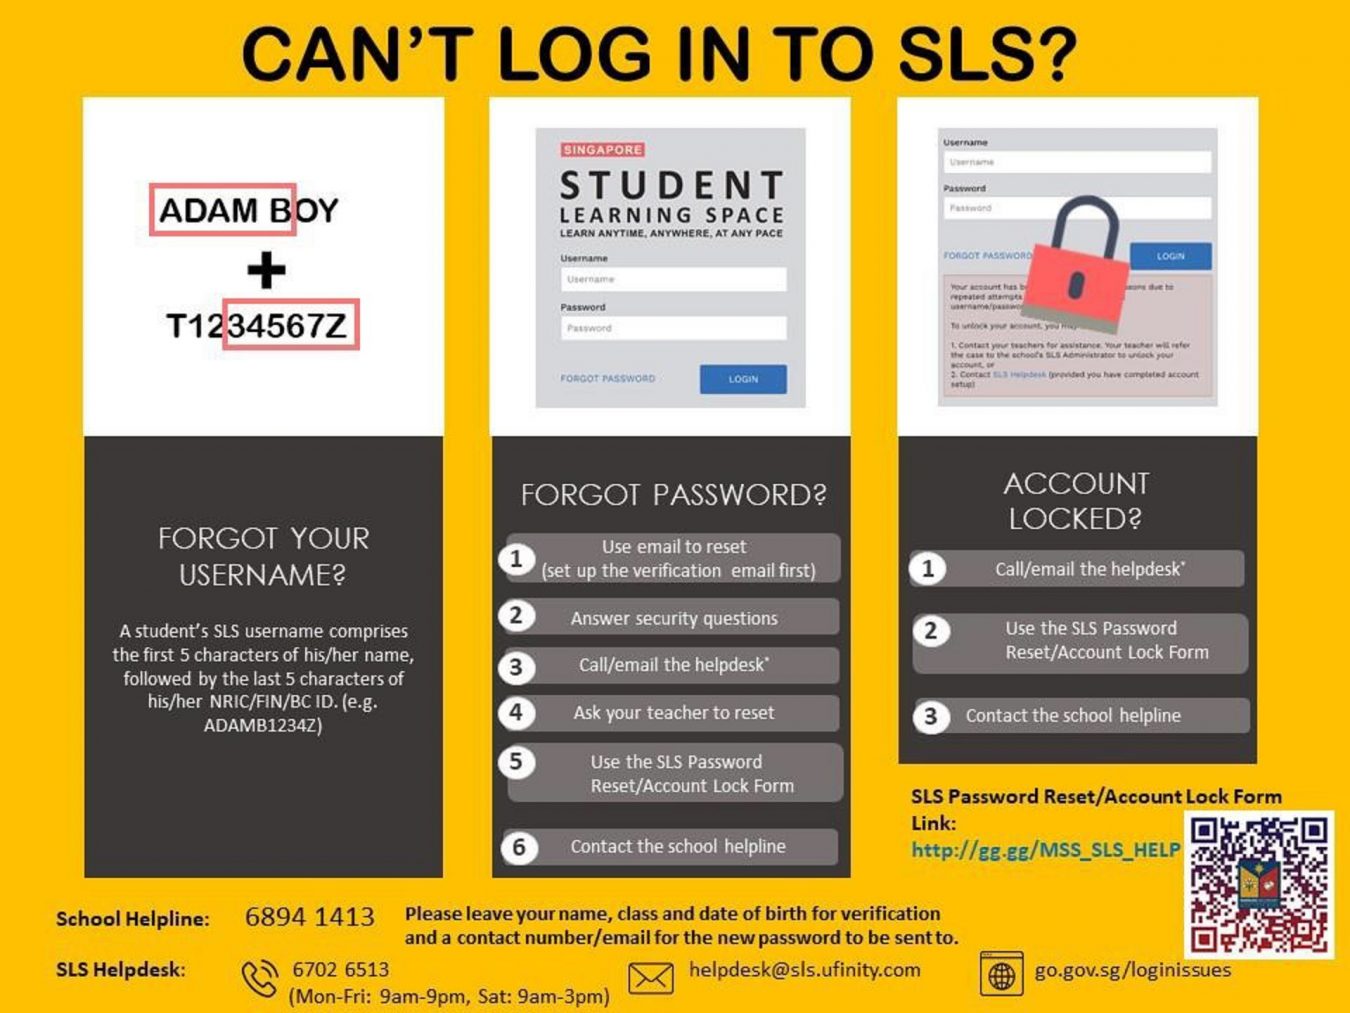 Problems log in to SLS